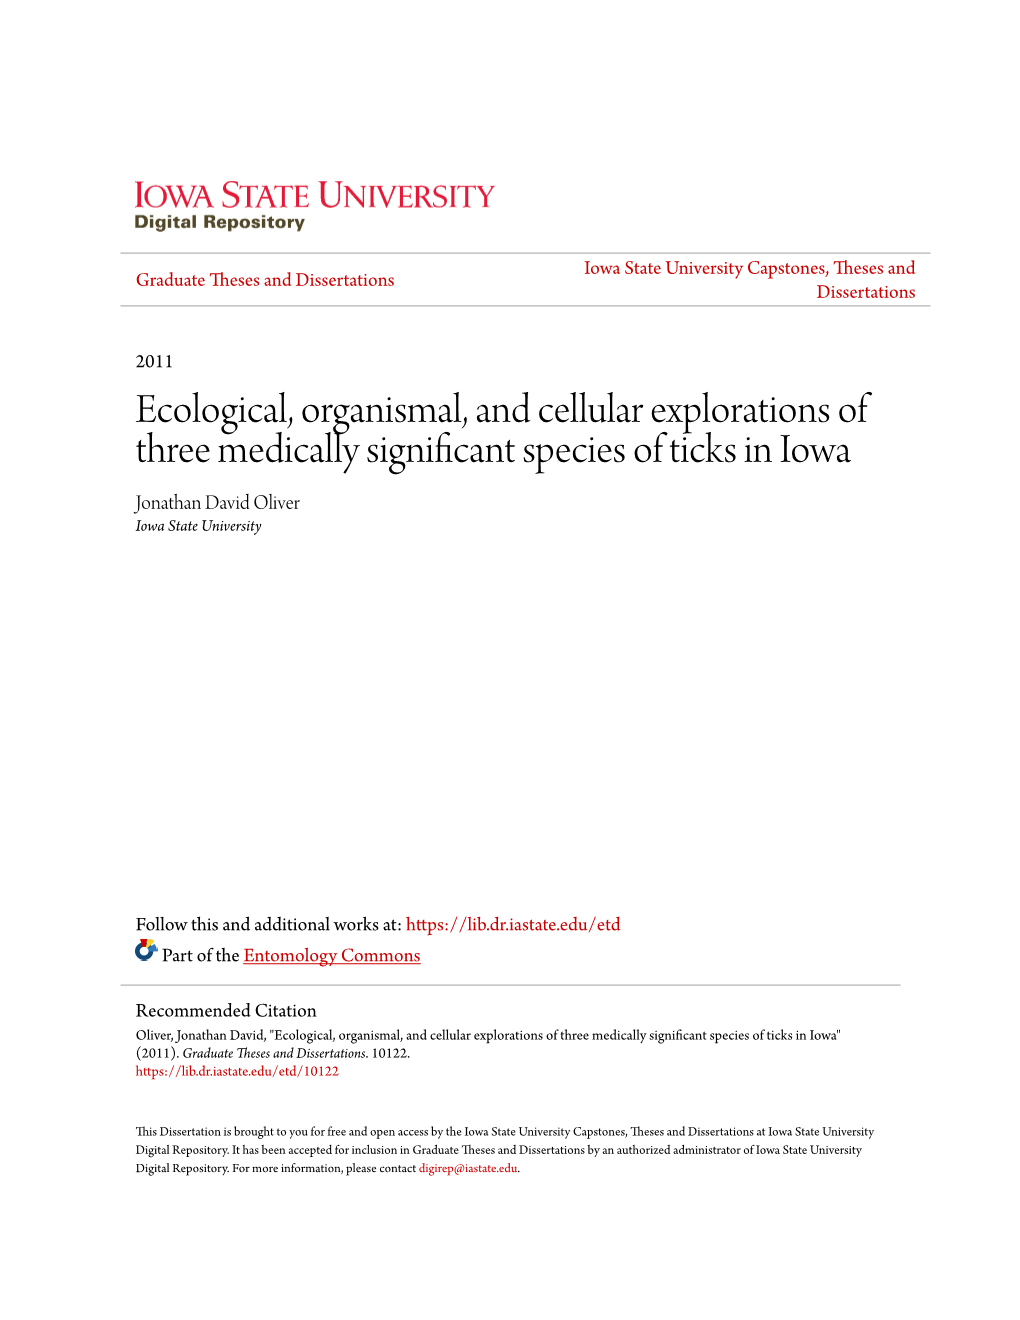 Ecological, Organismal, and Cellular Explorations of Three Medically Significant Species of Ticks in Iowa Jonathan David Oliver Iowa State University